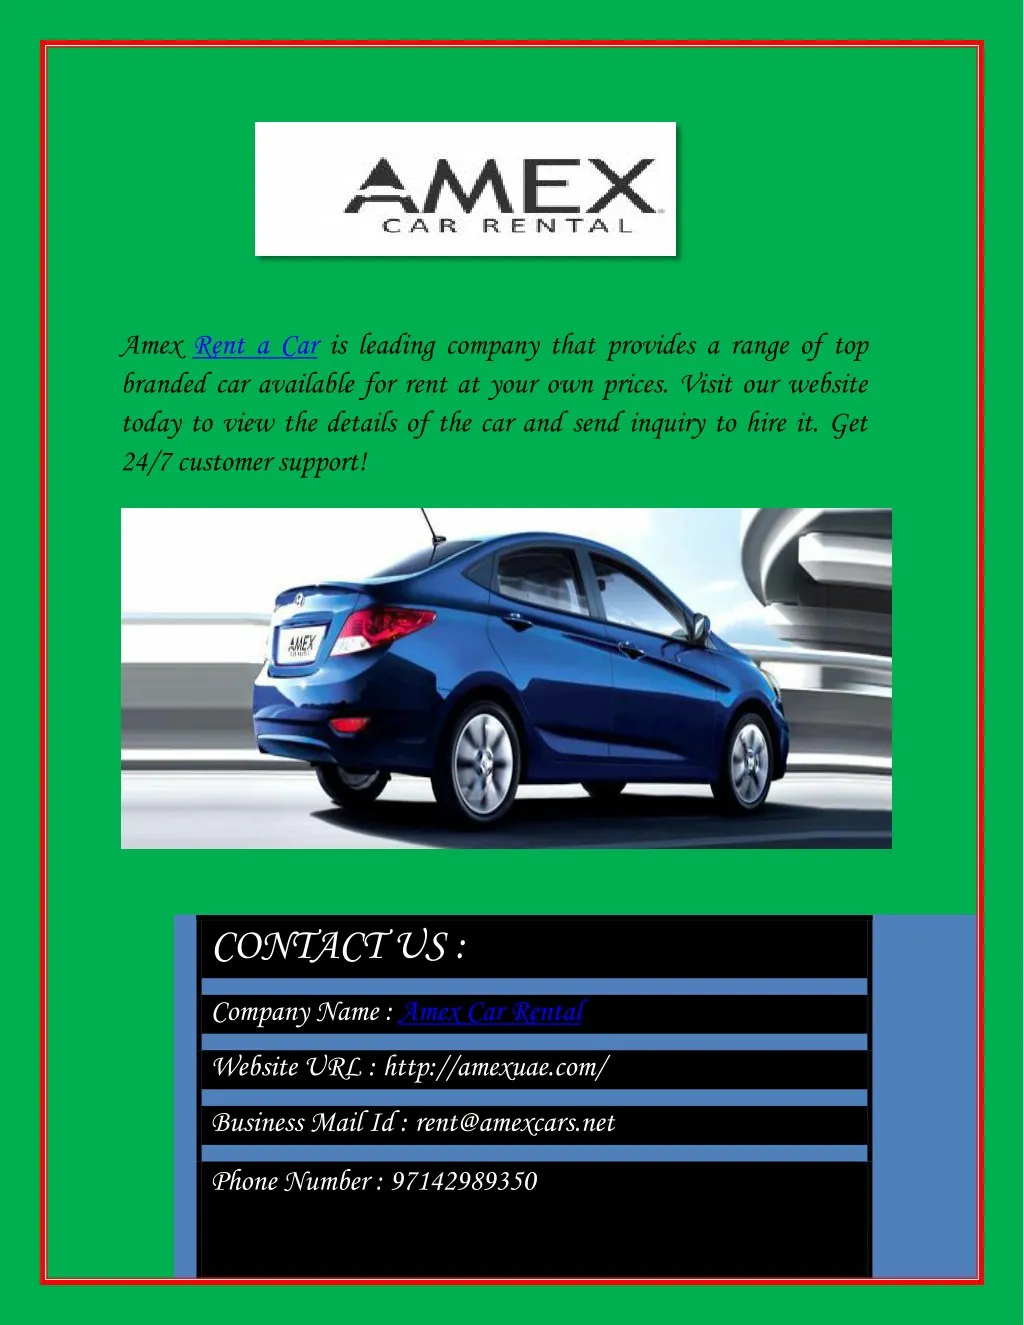 amex rent a car is leading company that provides